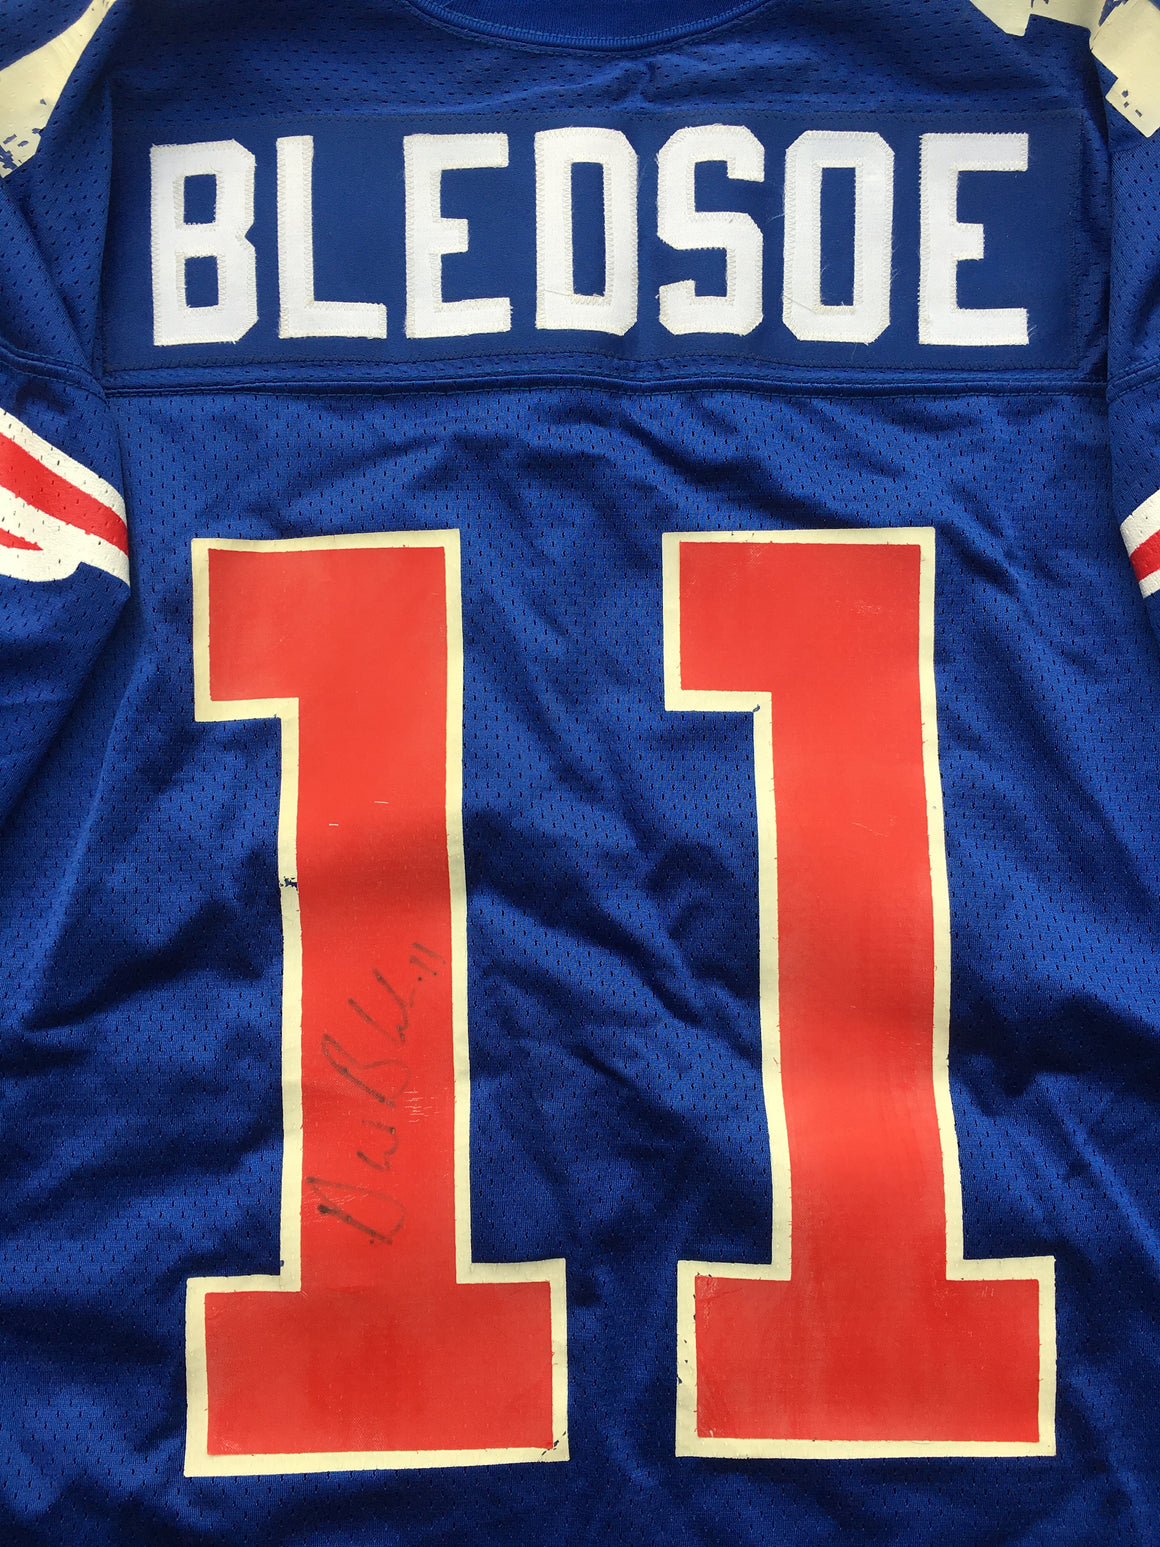 New England Patriots Drew Bledsoe SIGNED jersey - XL